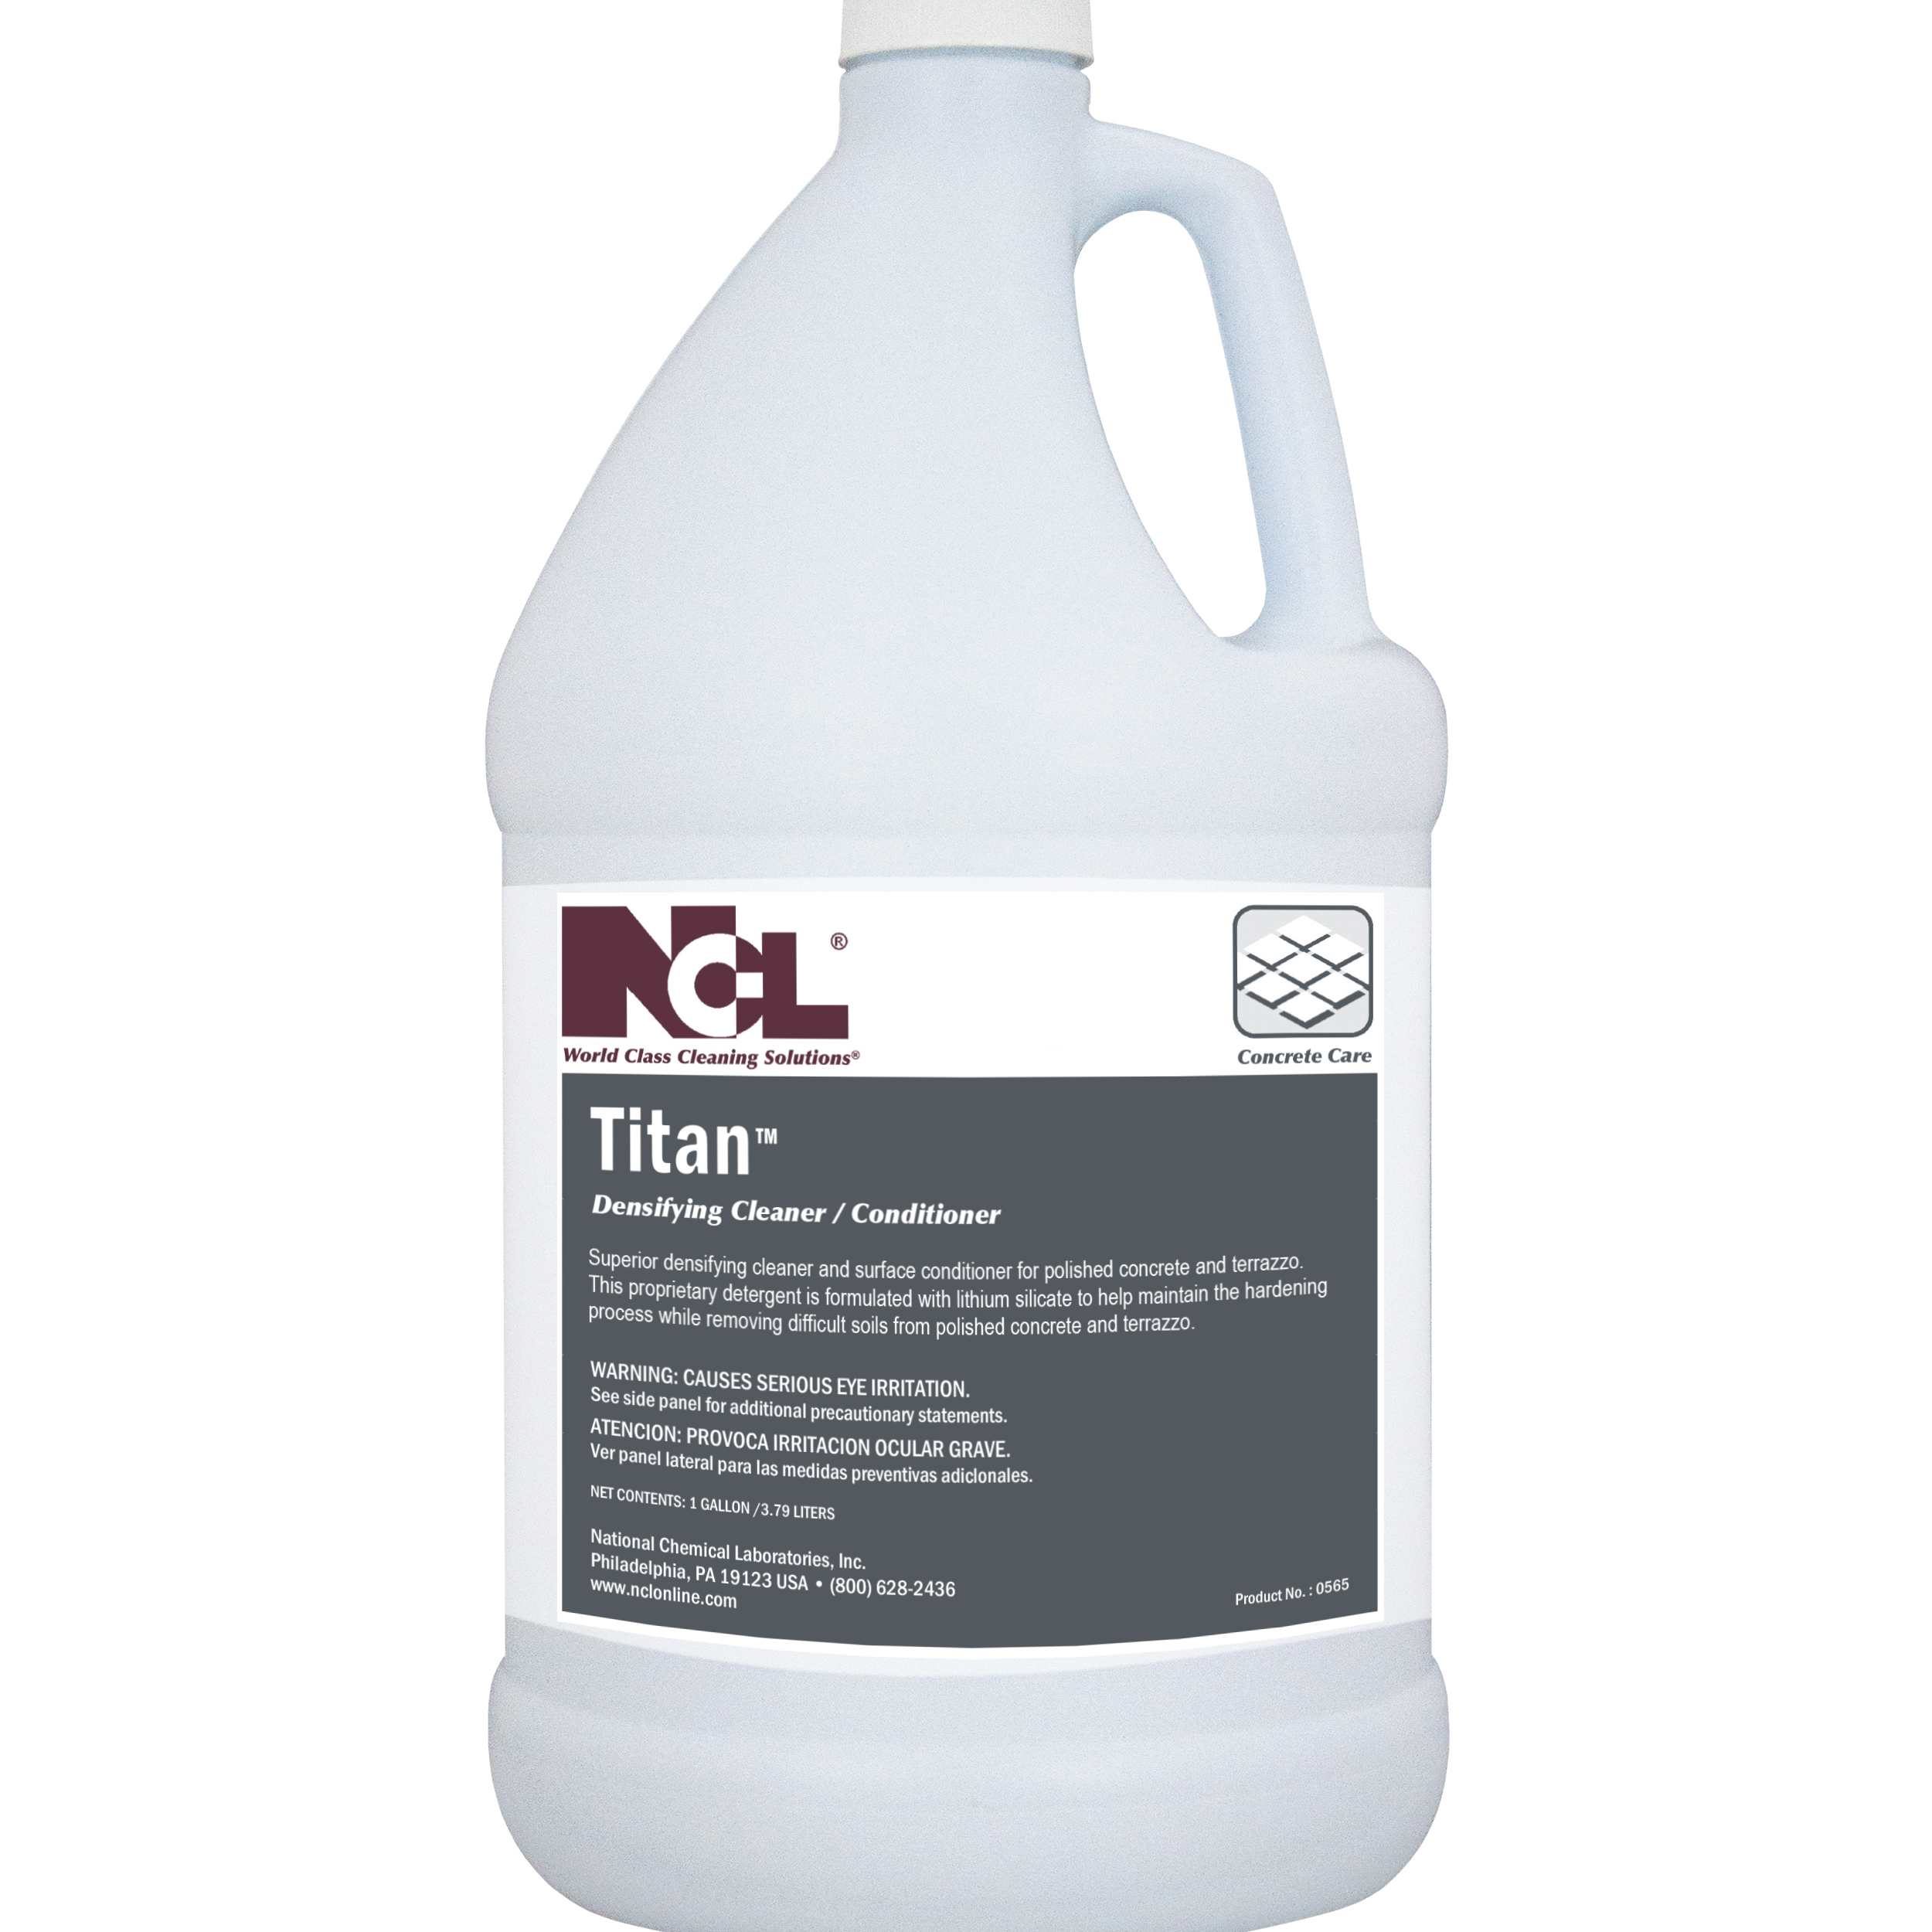  TITAN Densifying Cleaner / Conditioner 4/1 Gal. Case (NCL0565-29) 